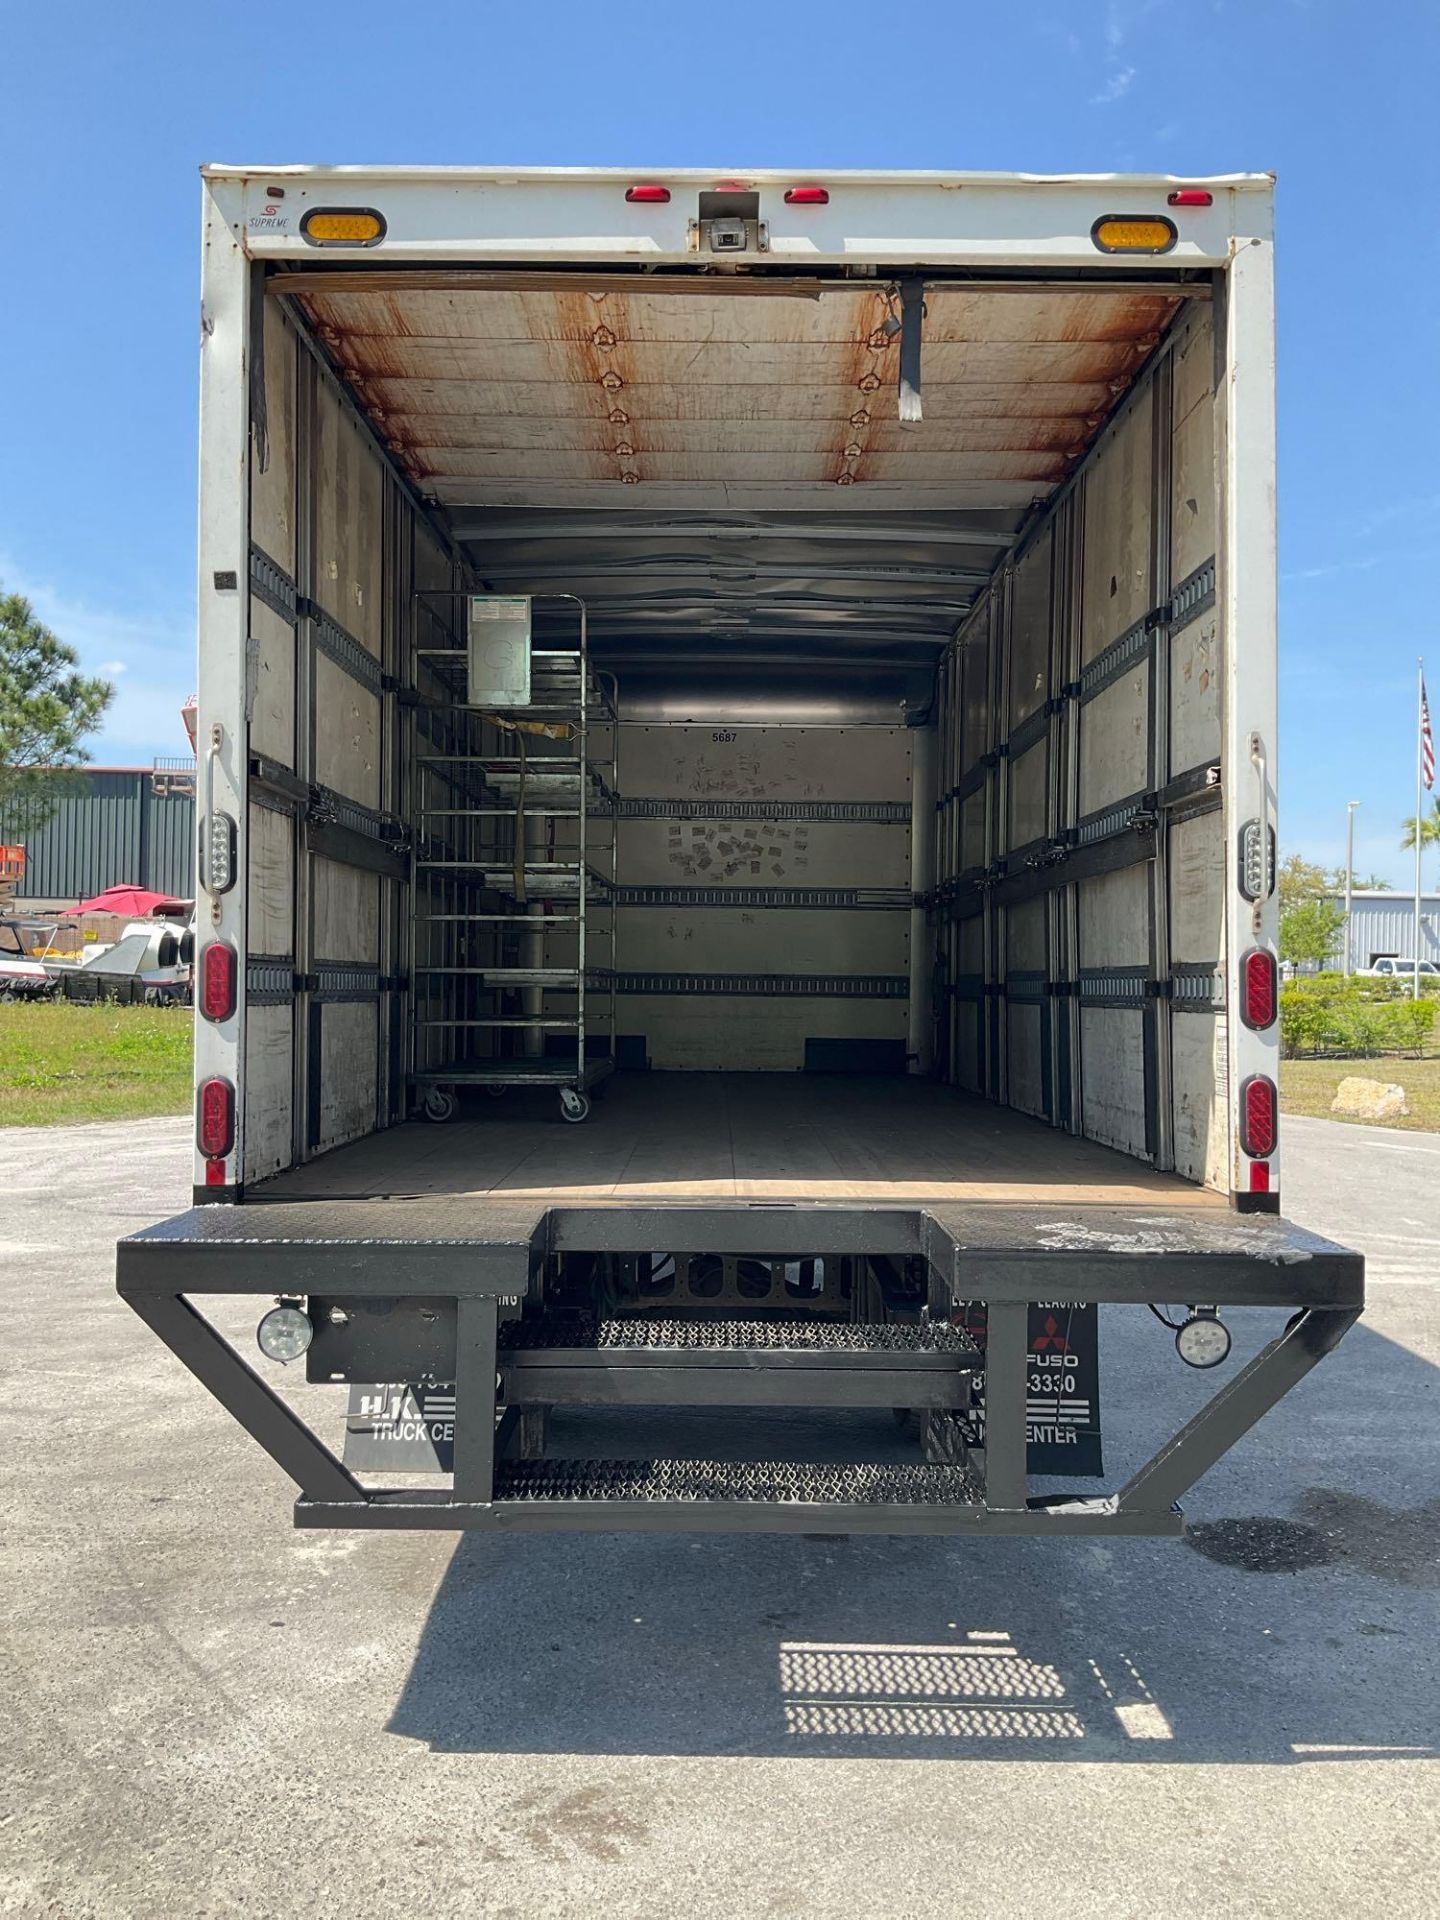 2017 HINO 740 BOX TRUCK , DIESEL , APPROX GVWR 17,950 LBS, BOX BODY APPROX 18FT, ETRACKS, BACK UP... - Image 21 of 29